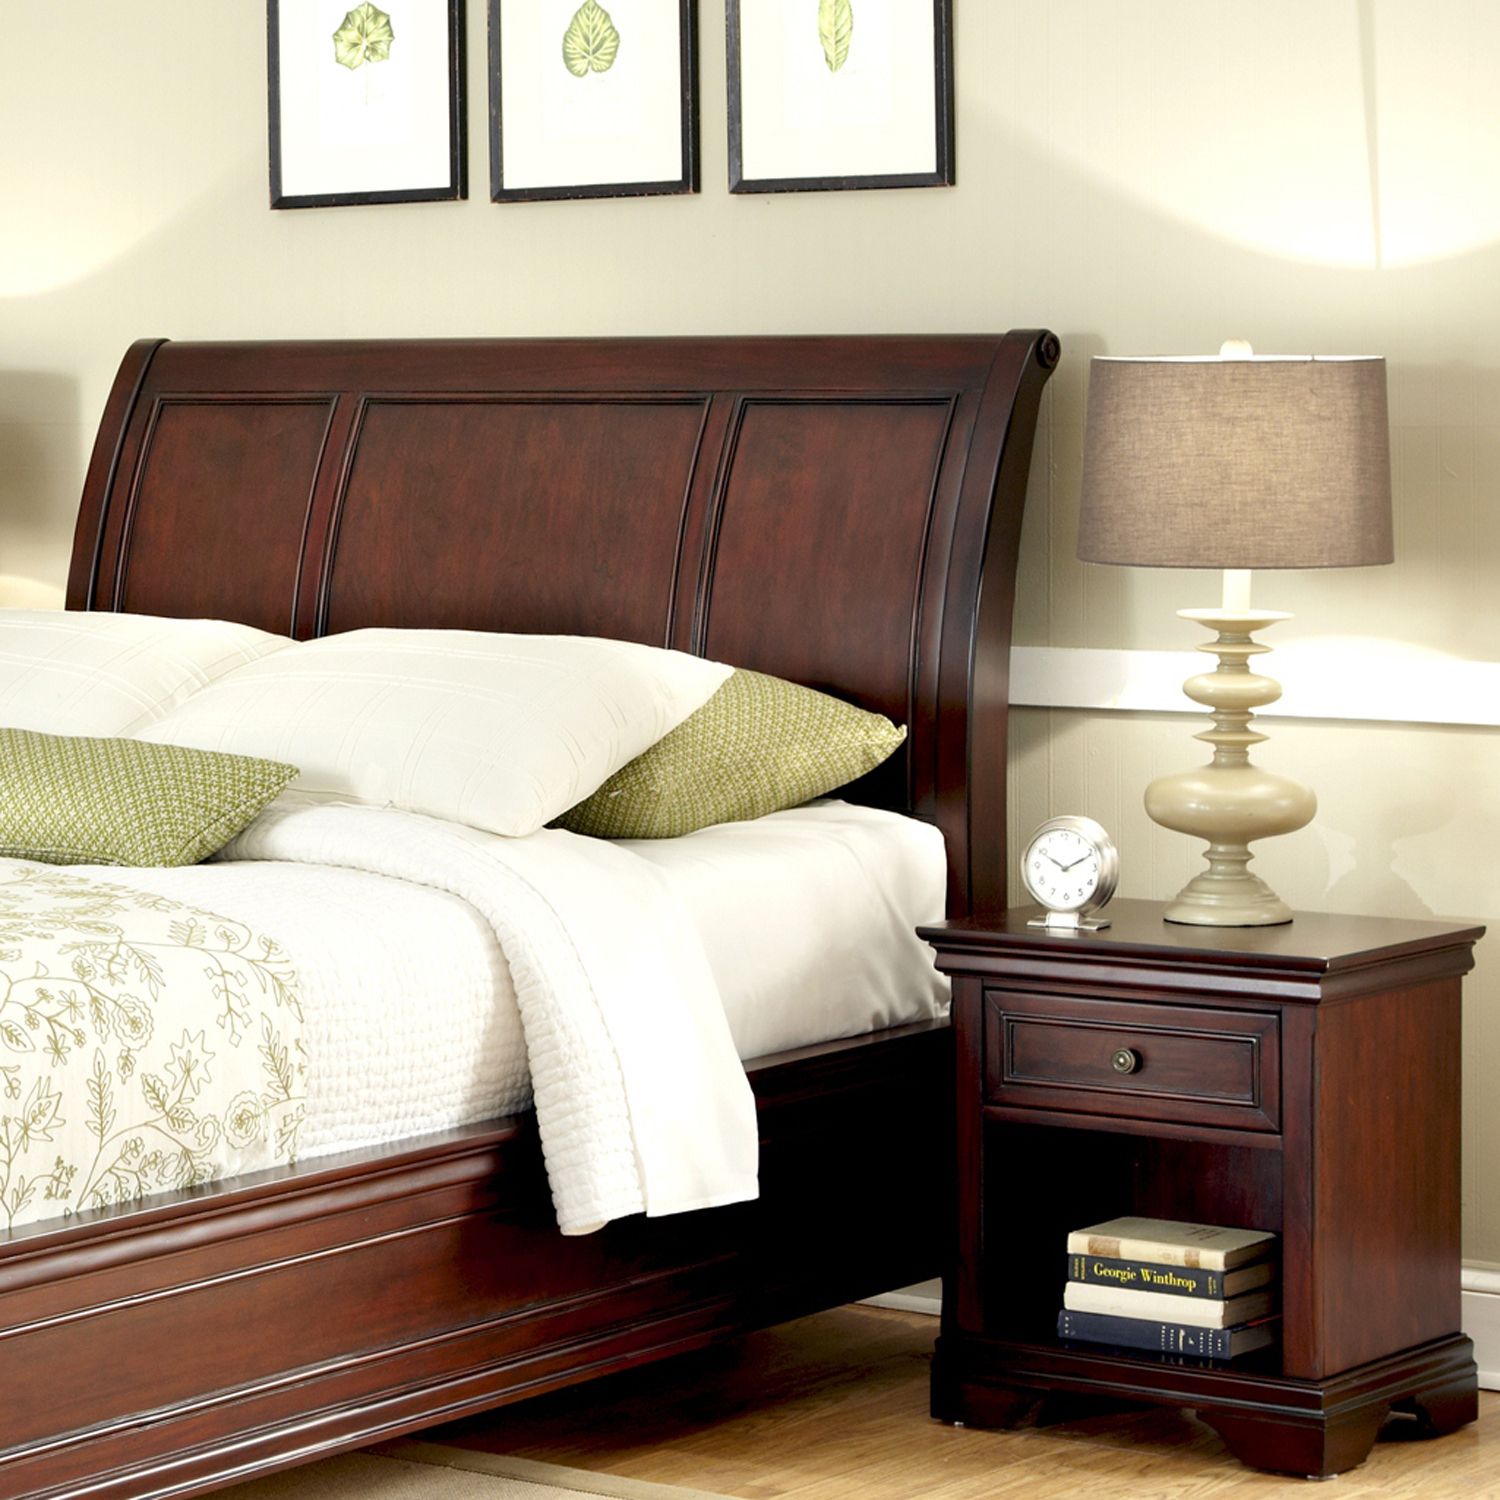 Image for homestyles Lafayette 2-pc. King Headboard & Nightstand Set at Kohl's.